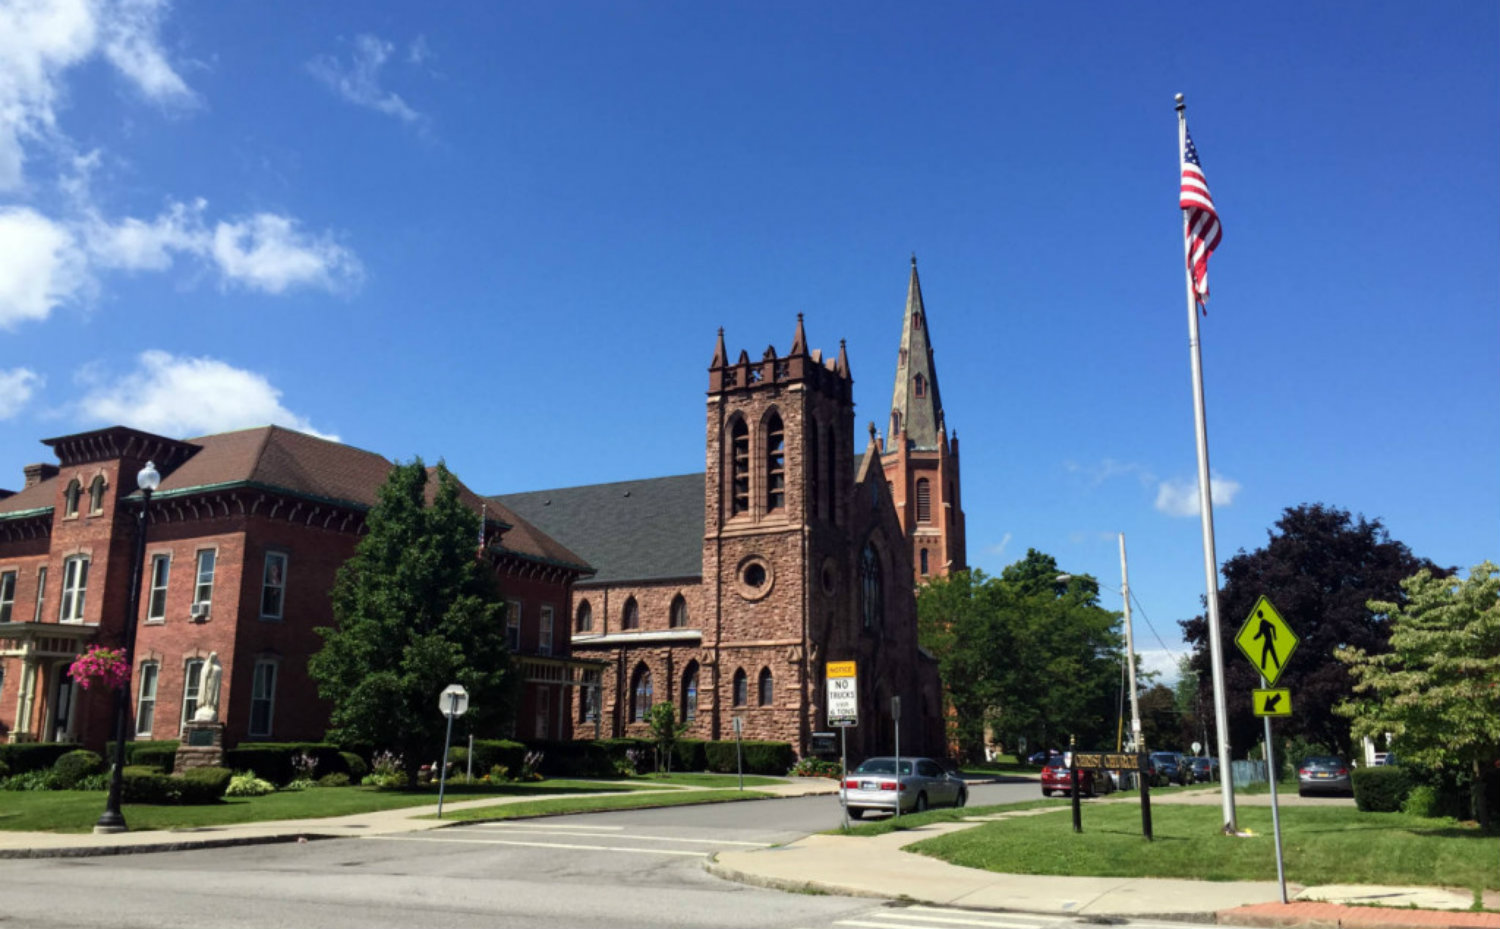 Ecclesiastic Resentments in Albion, NY